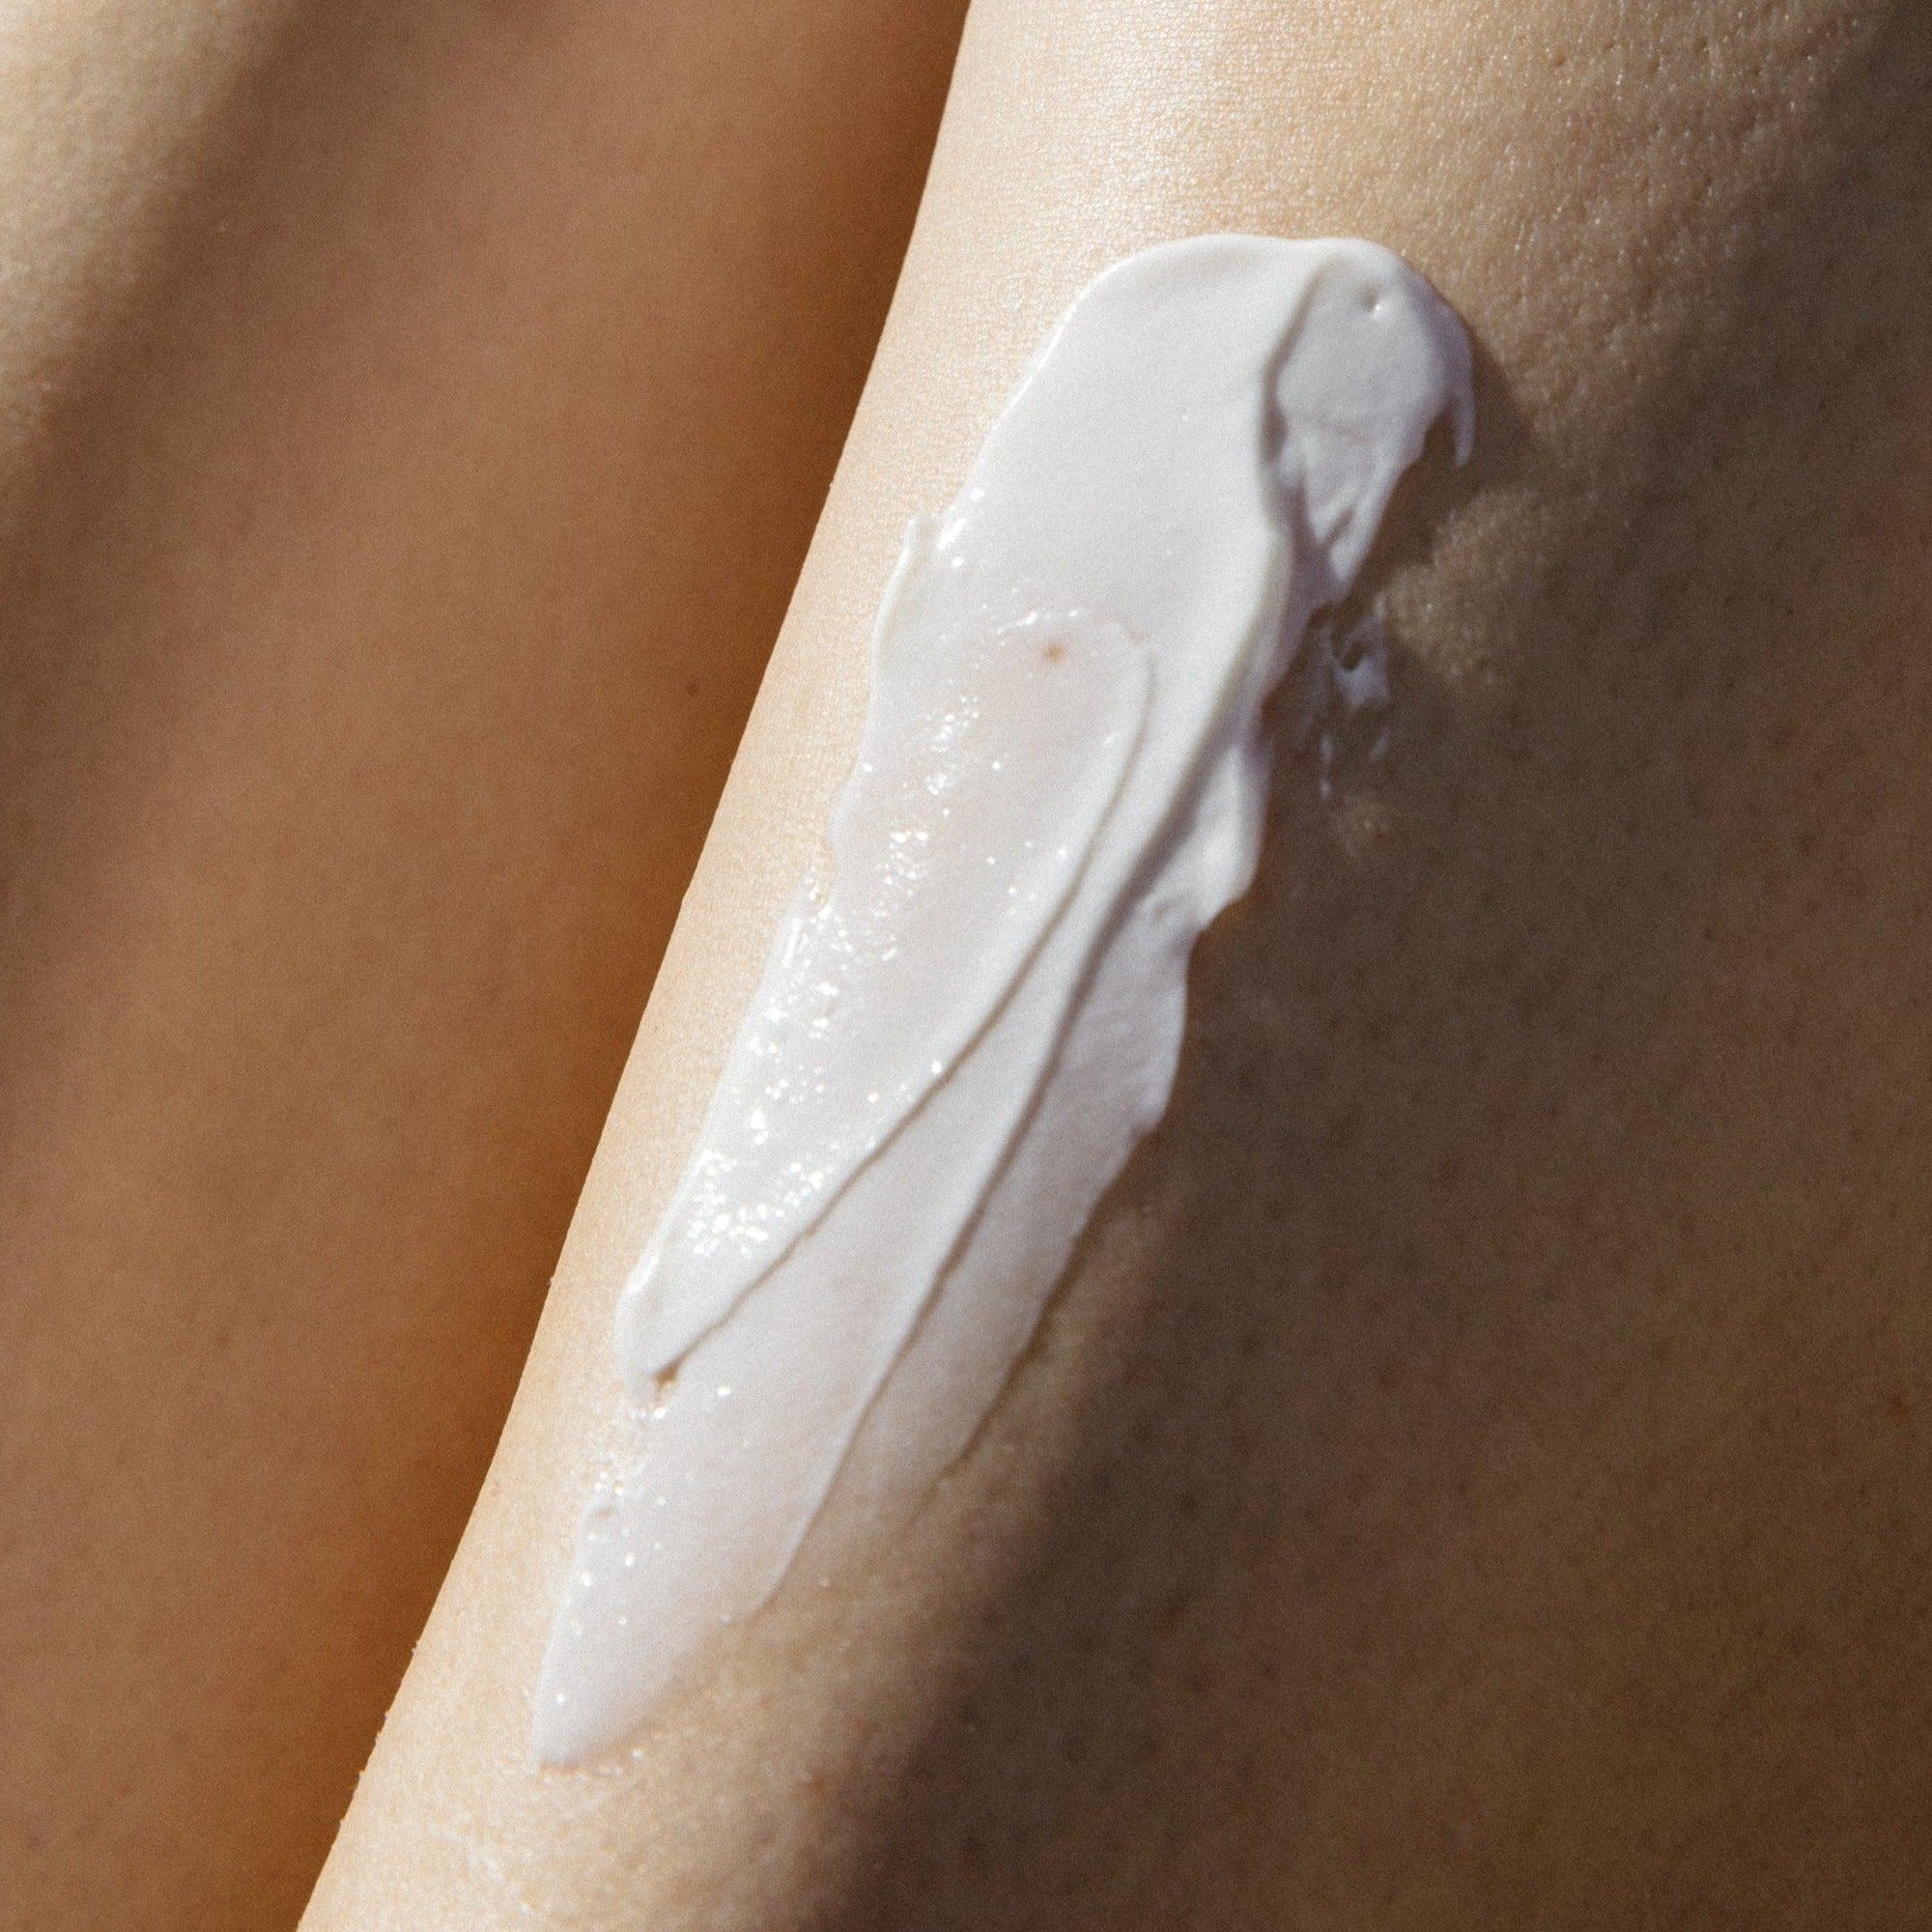 A woman's leg with Wiley Body's organic aloe vera cream from the Wiley Body Bundle on it.